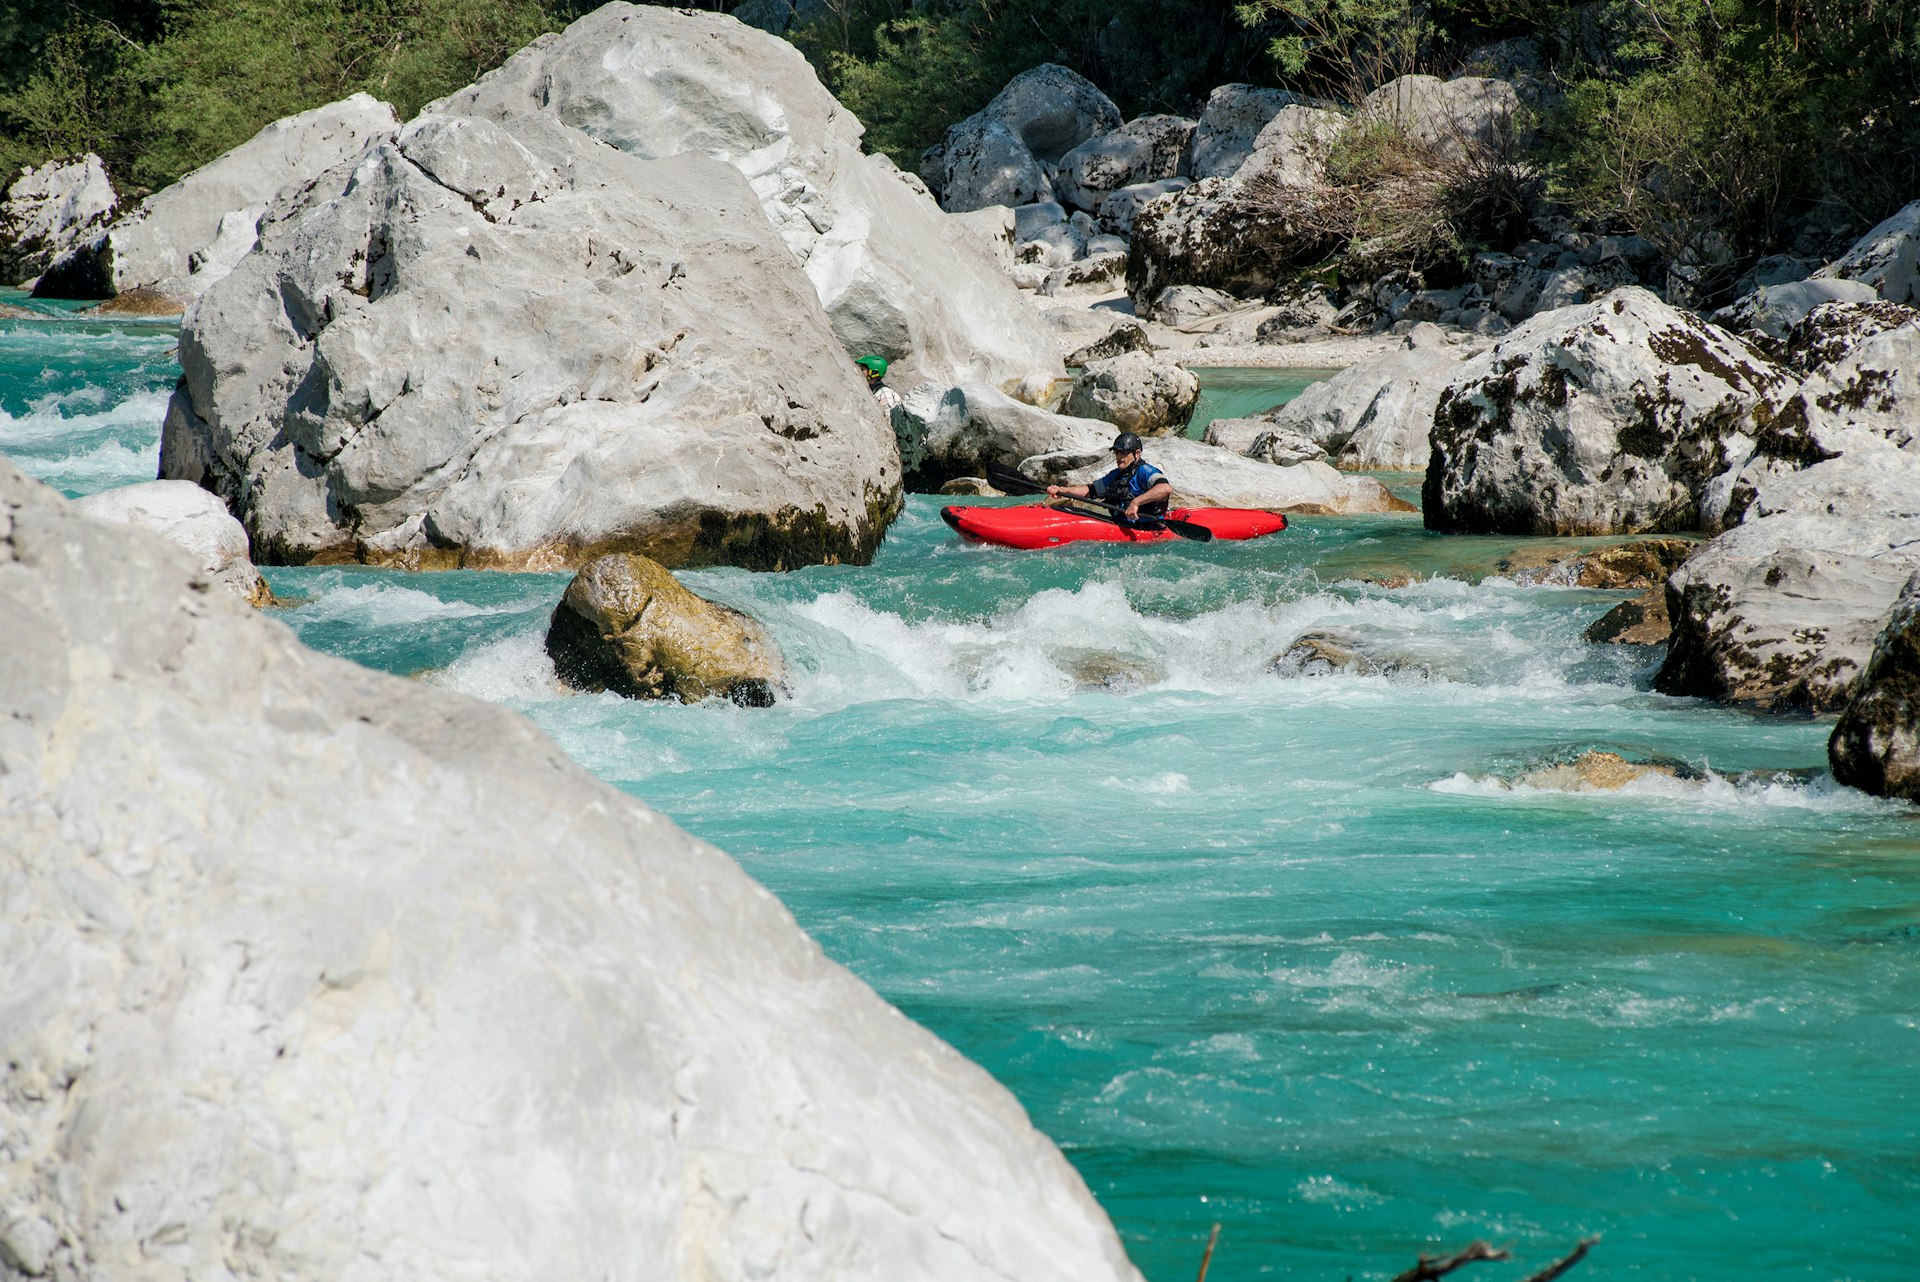 Features - Mature Man Kayaking On The Turquoise Water Of River Soca - Slovenia